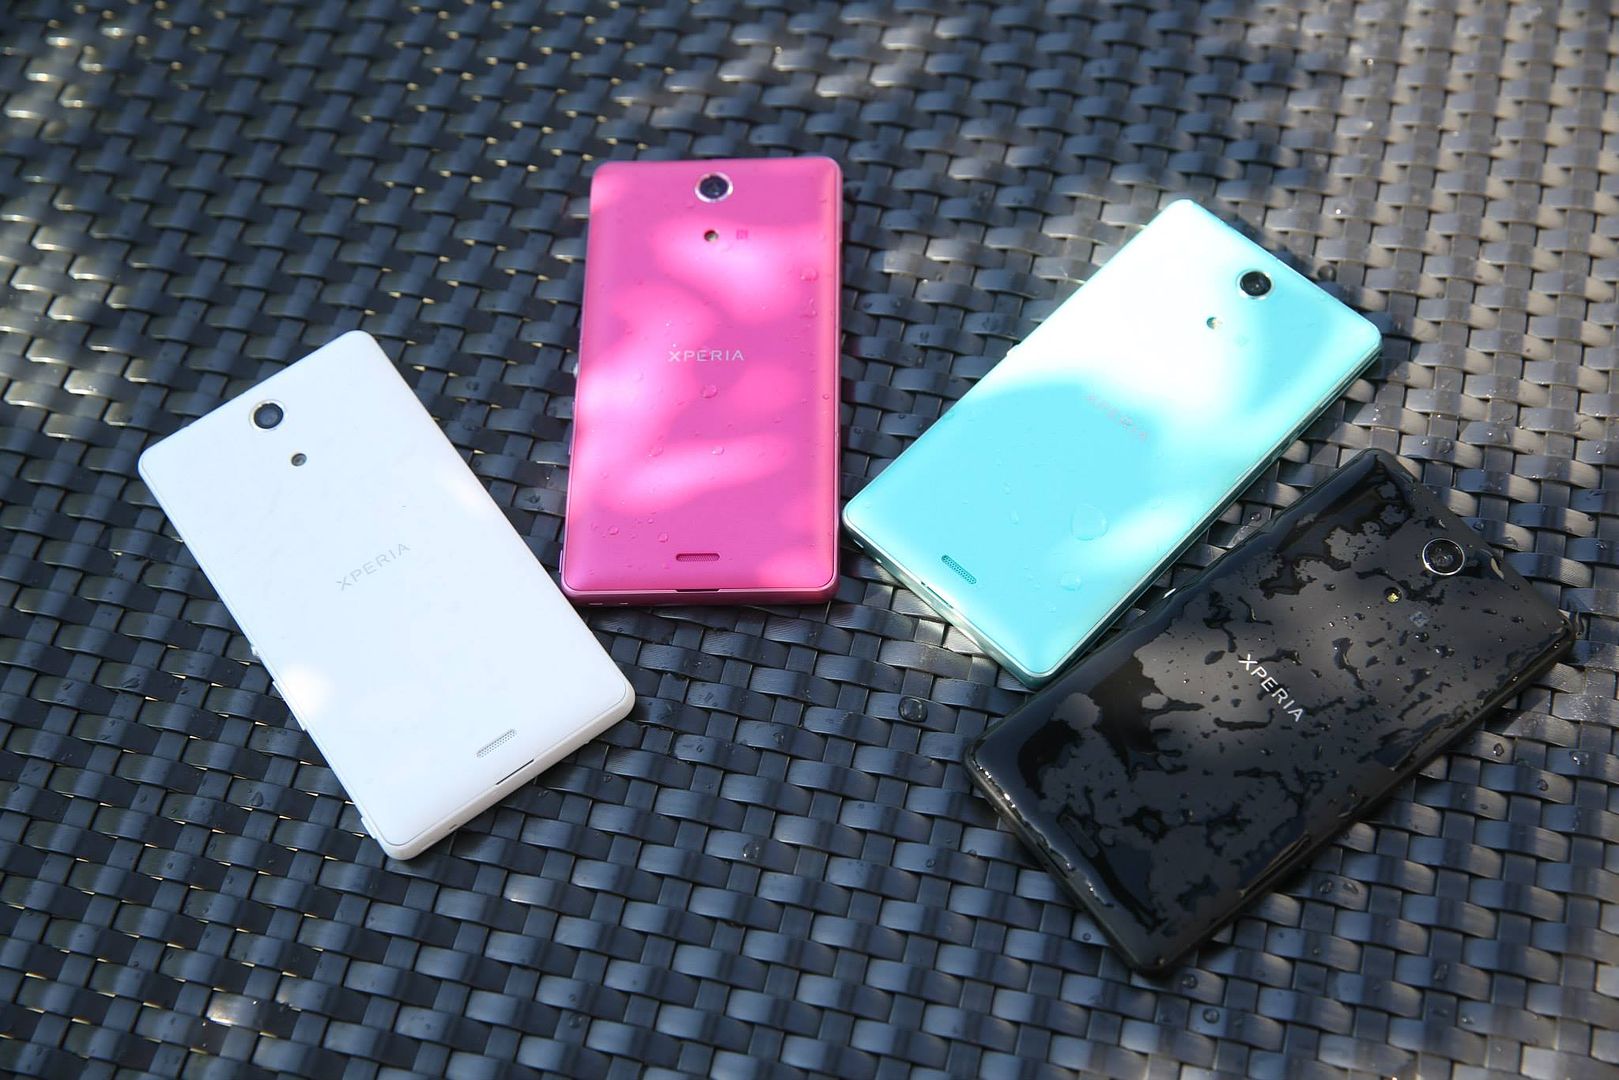 Xperia ZR to get Hong Kong launch in early July 